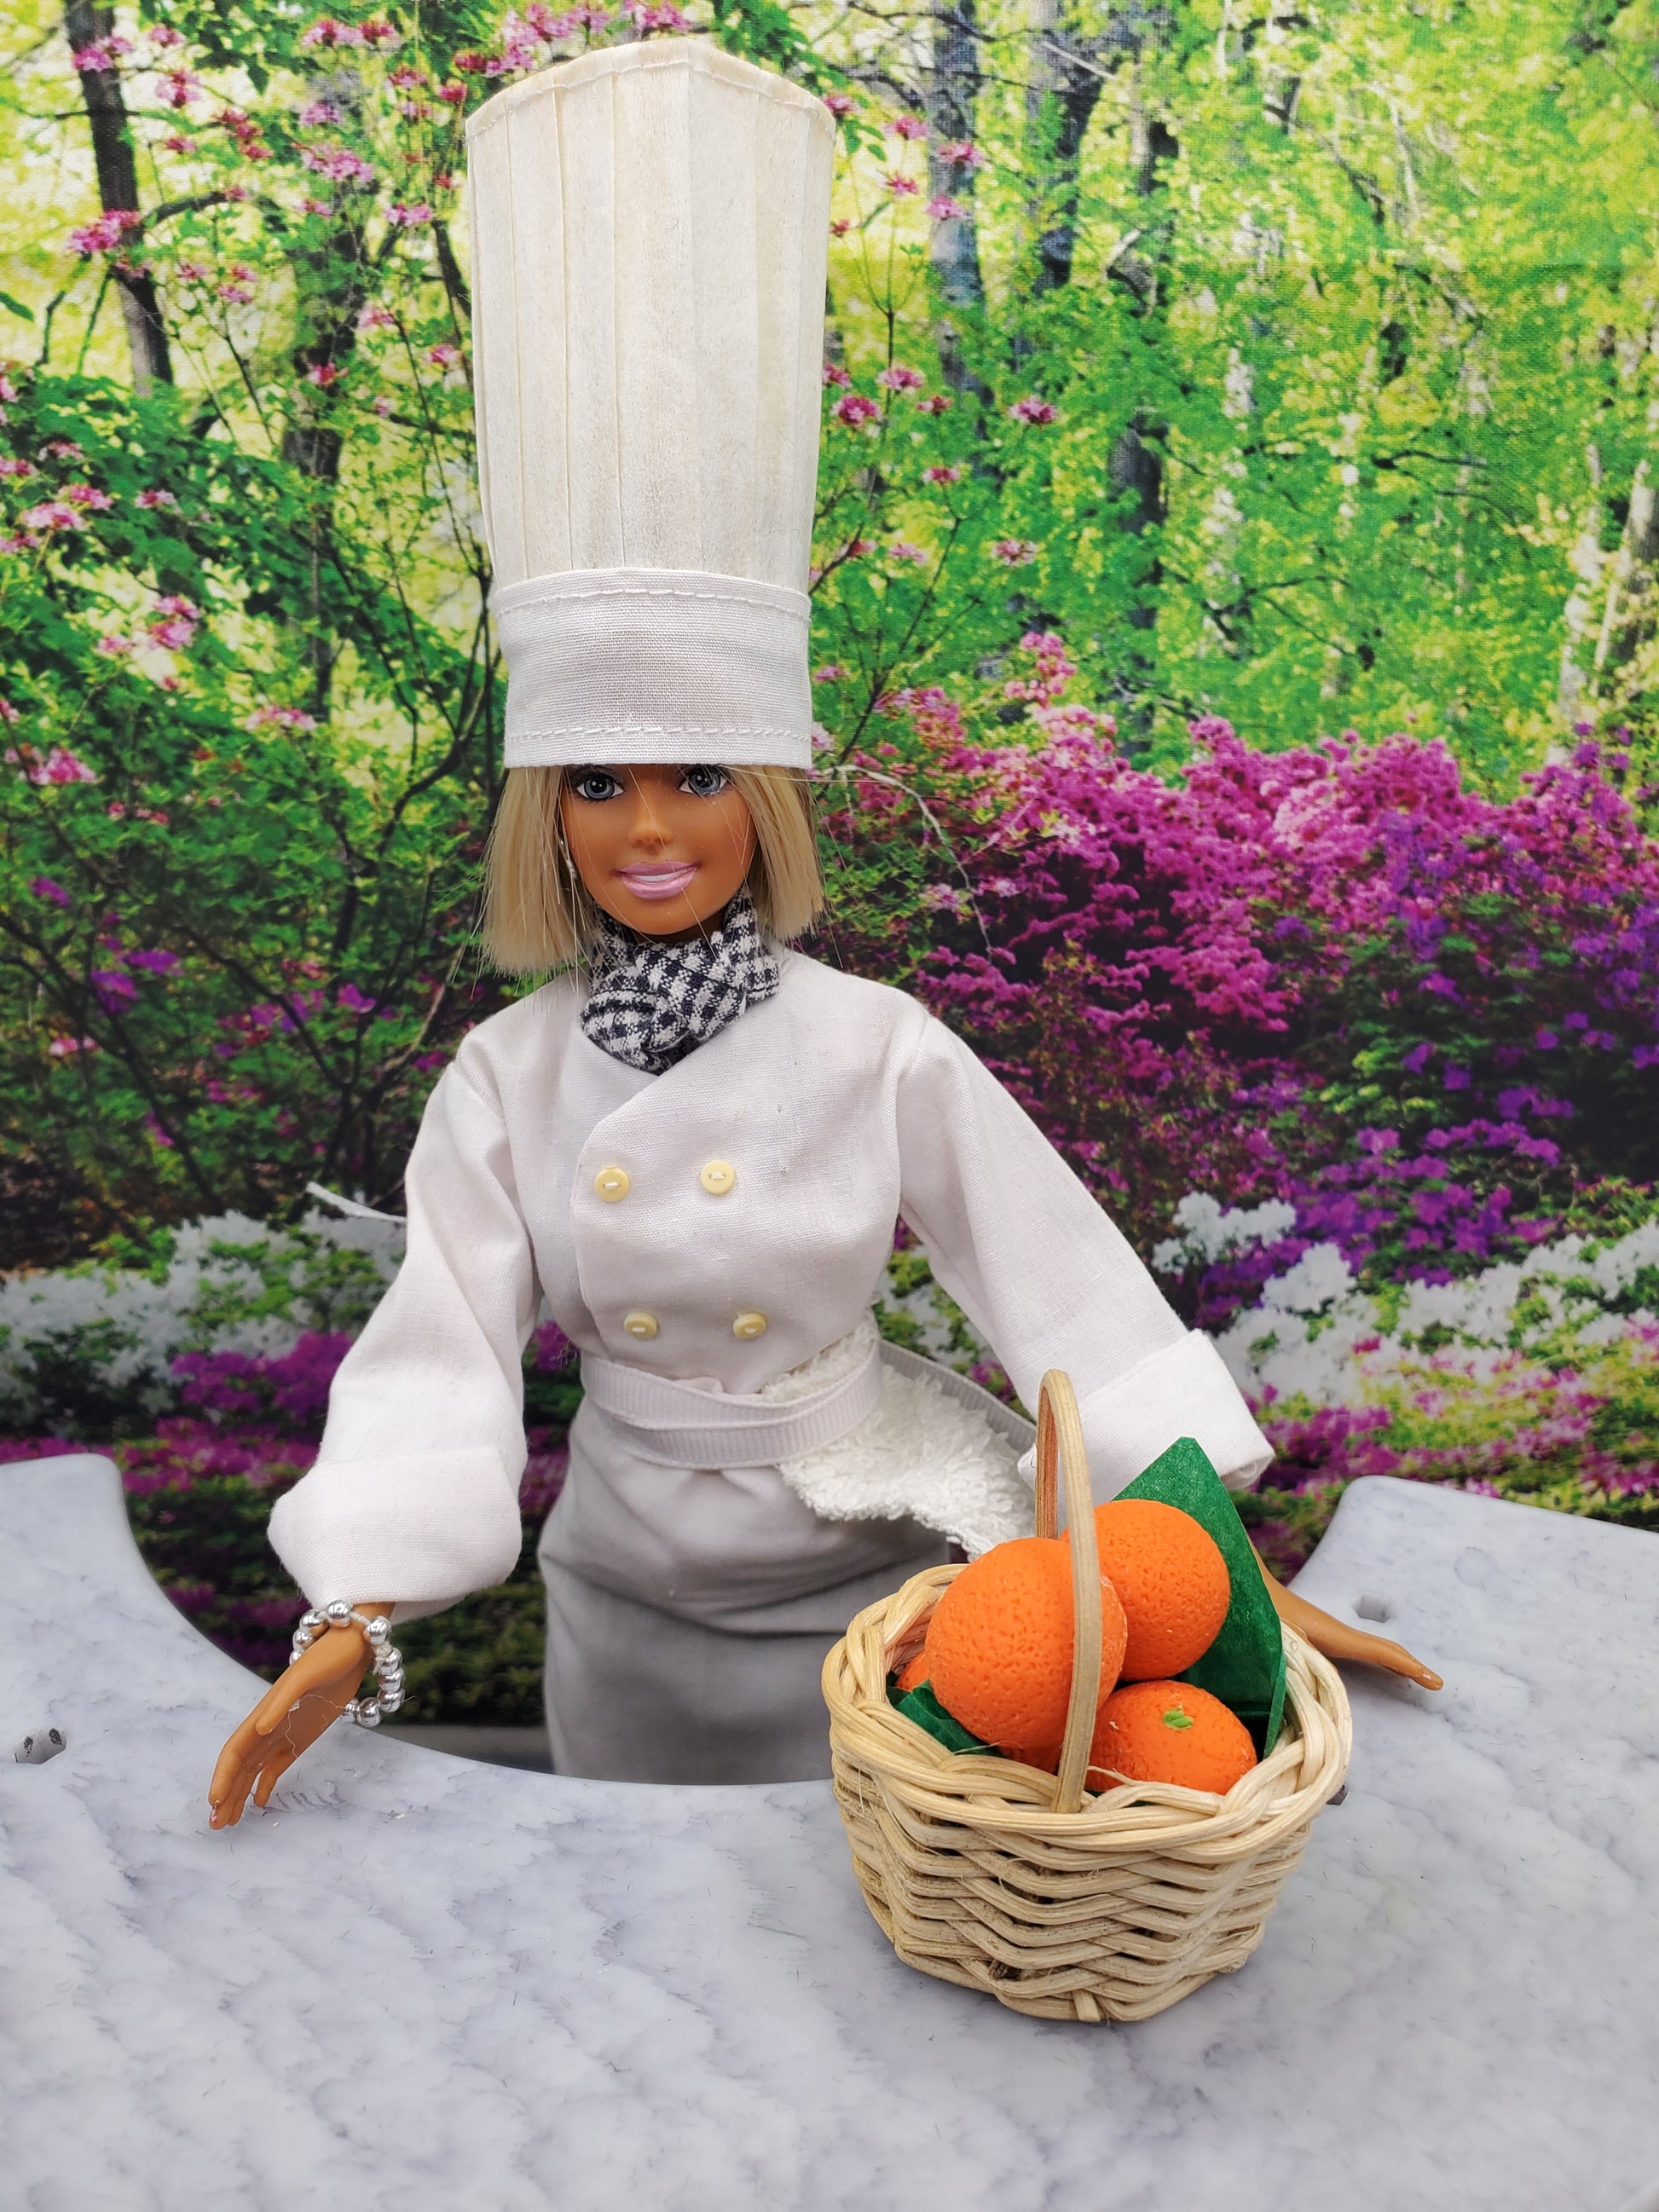 Barbie with Larger Oranges